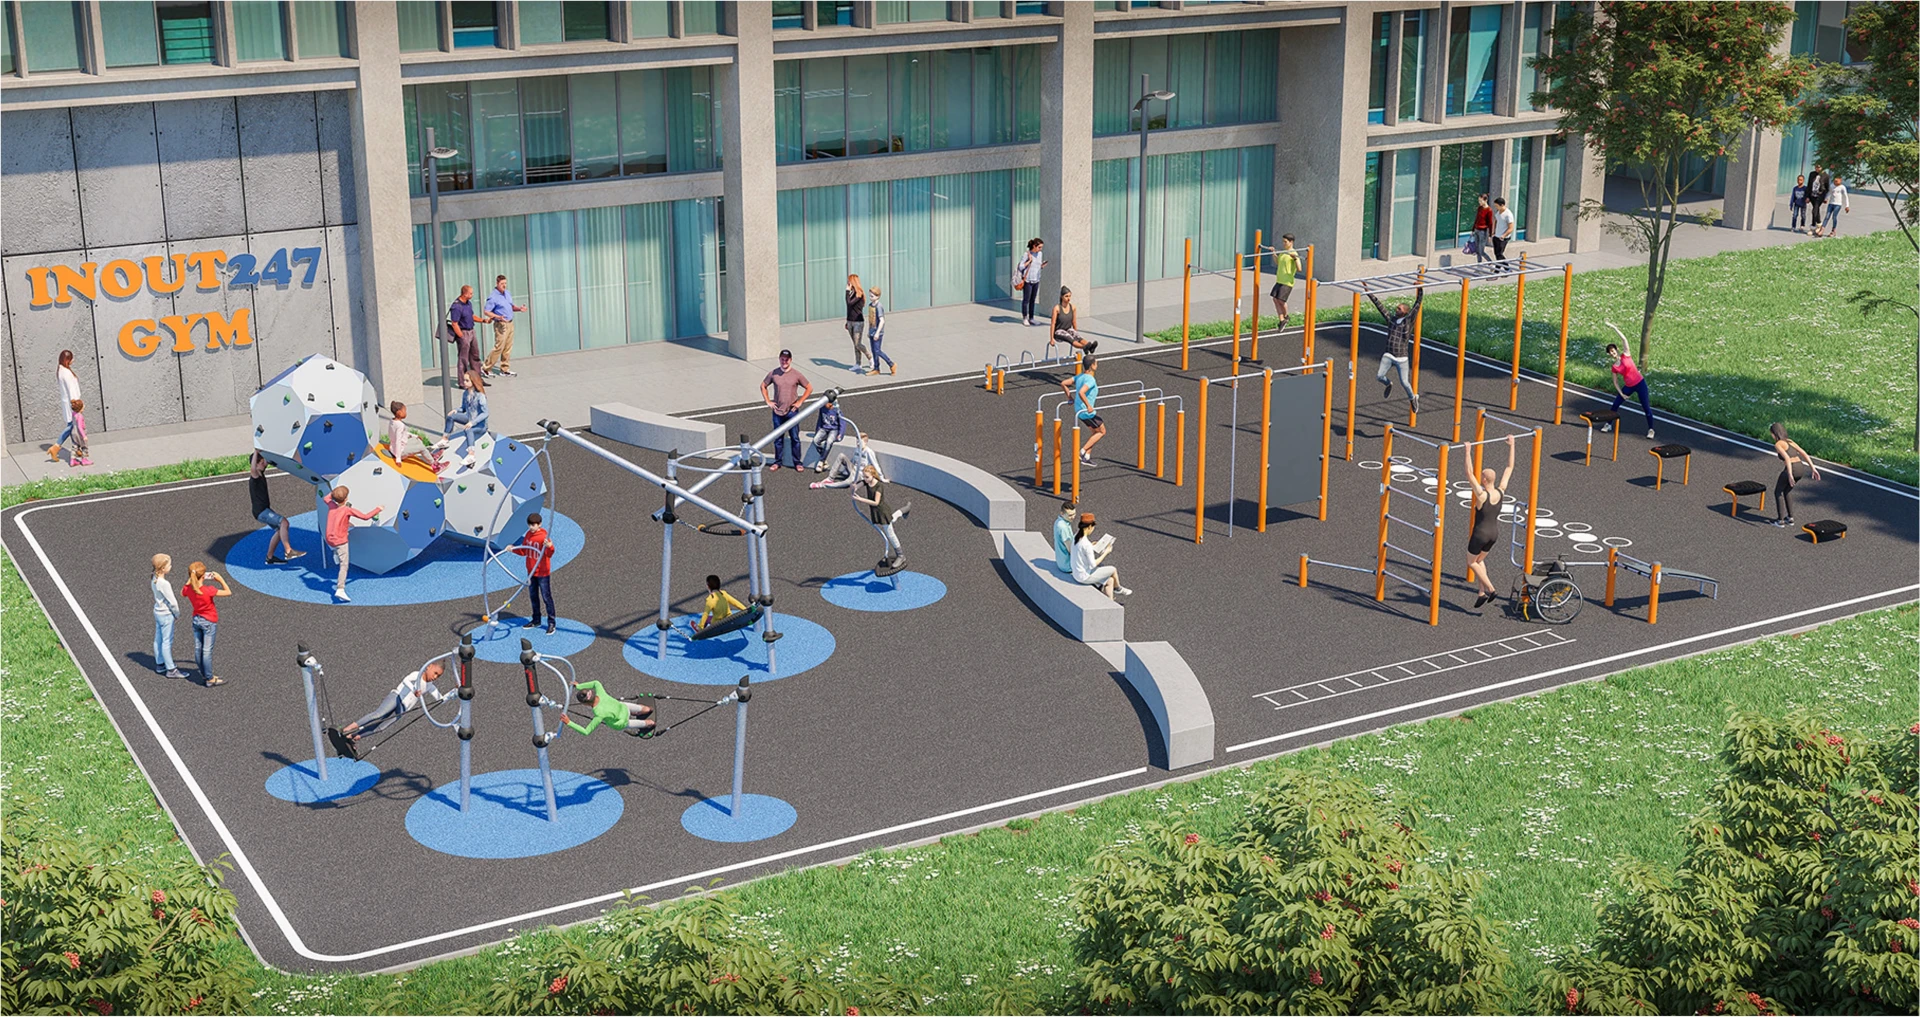 An artist's rendering of a playground in front of a building